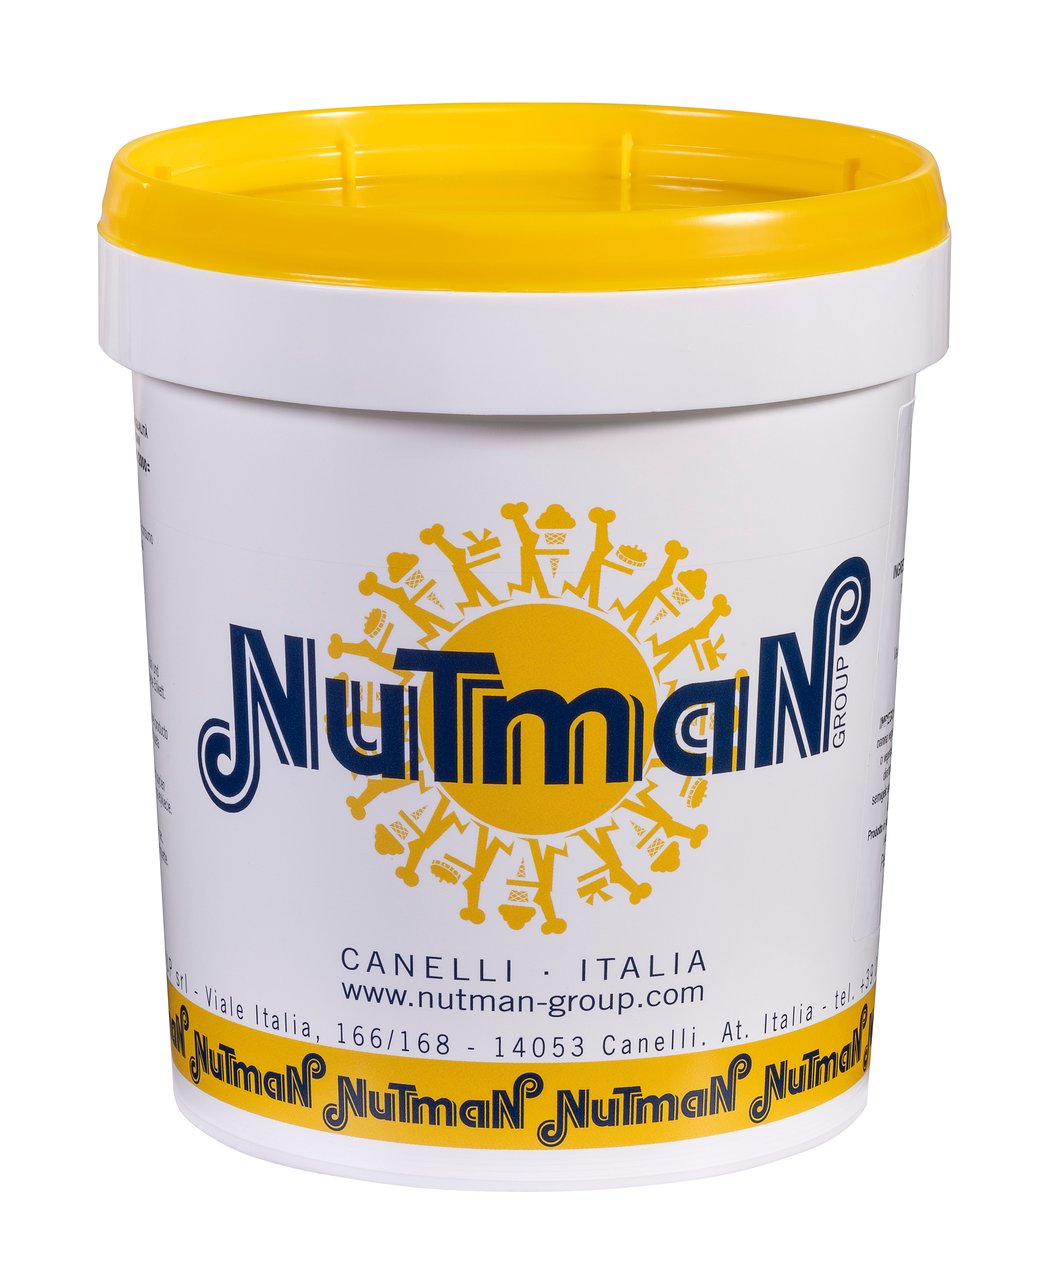 Nutman Group, Canelli